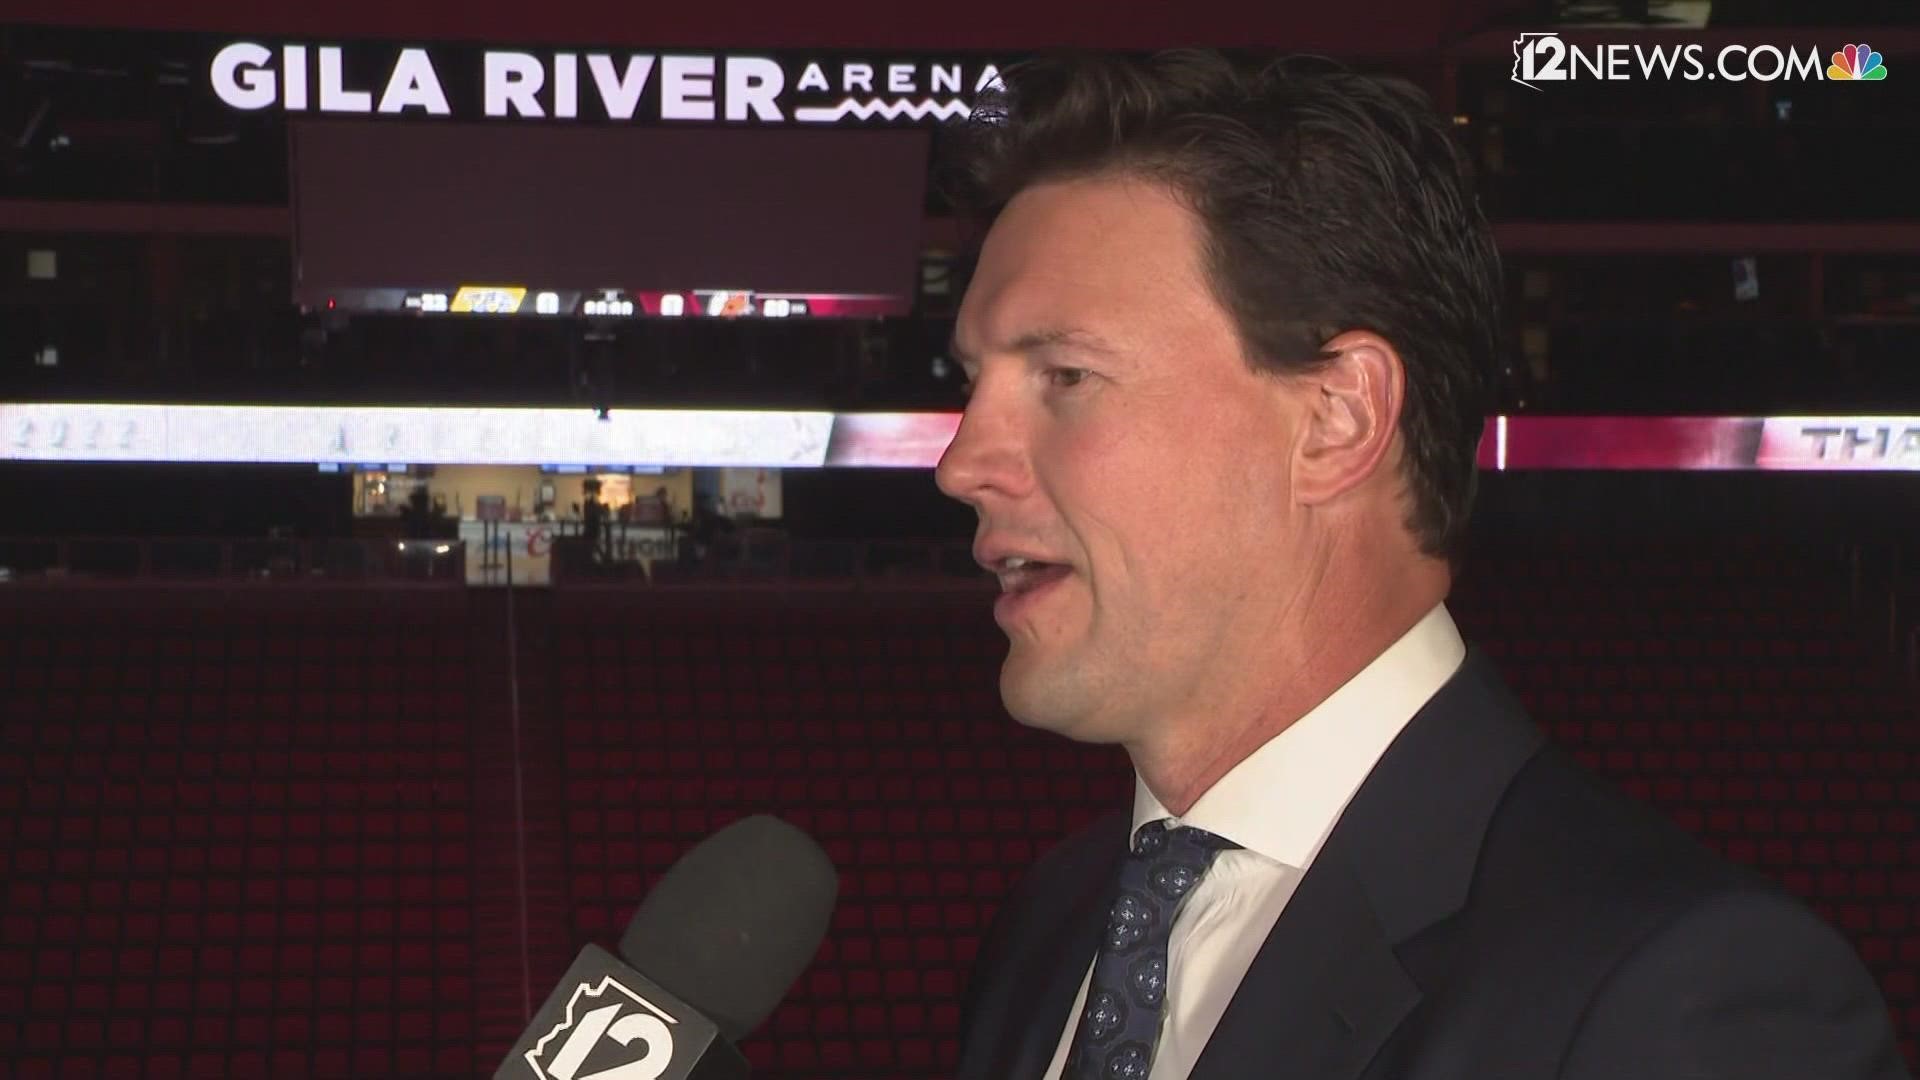 Shane Doan shares memories of his 20-year playing career with the Coyotes ahead of the team's final game in Glendale.